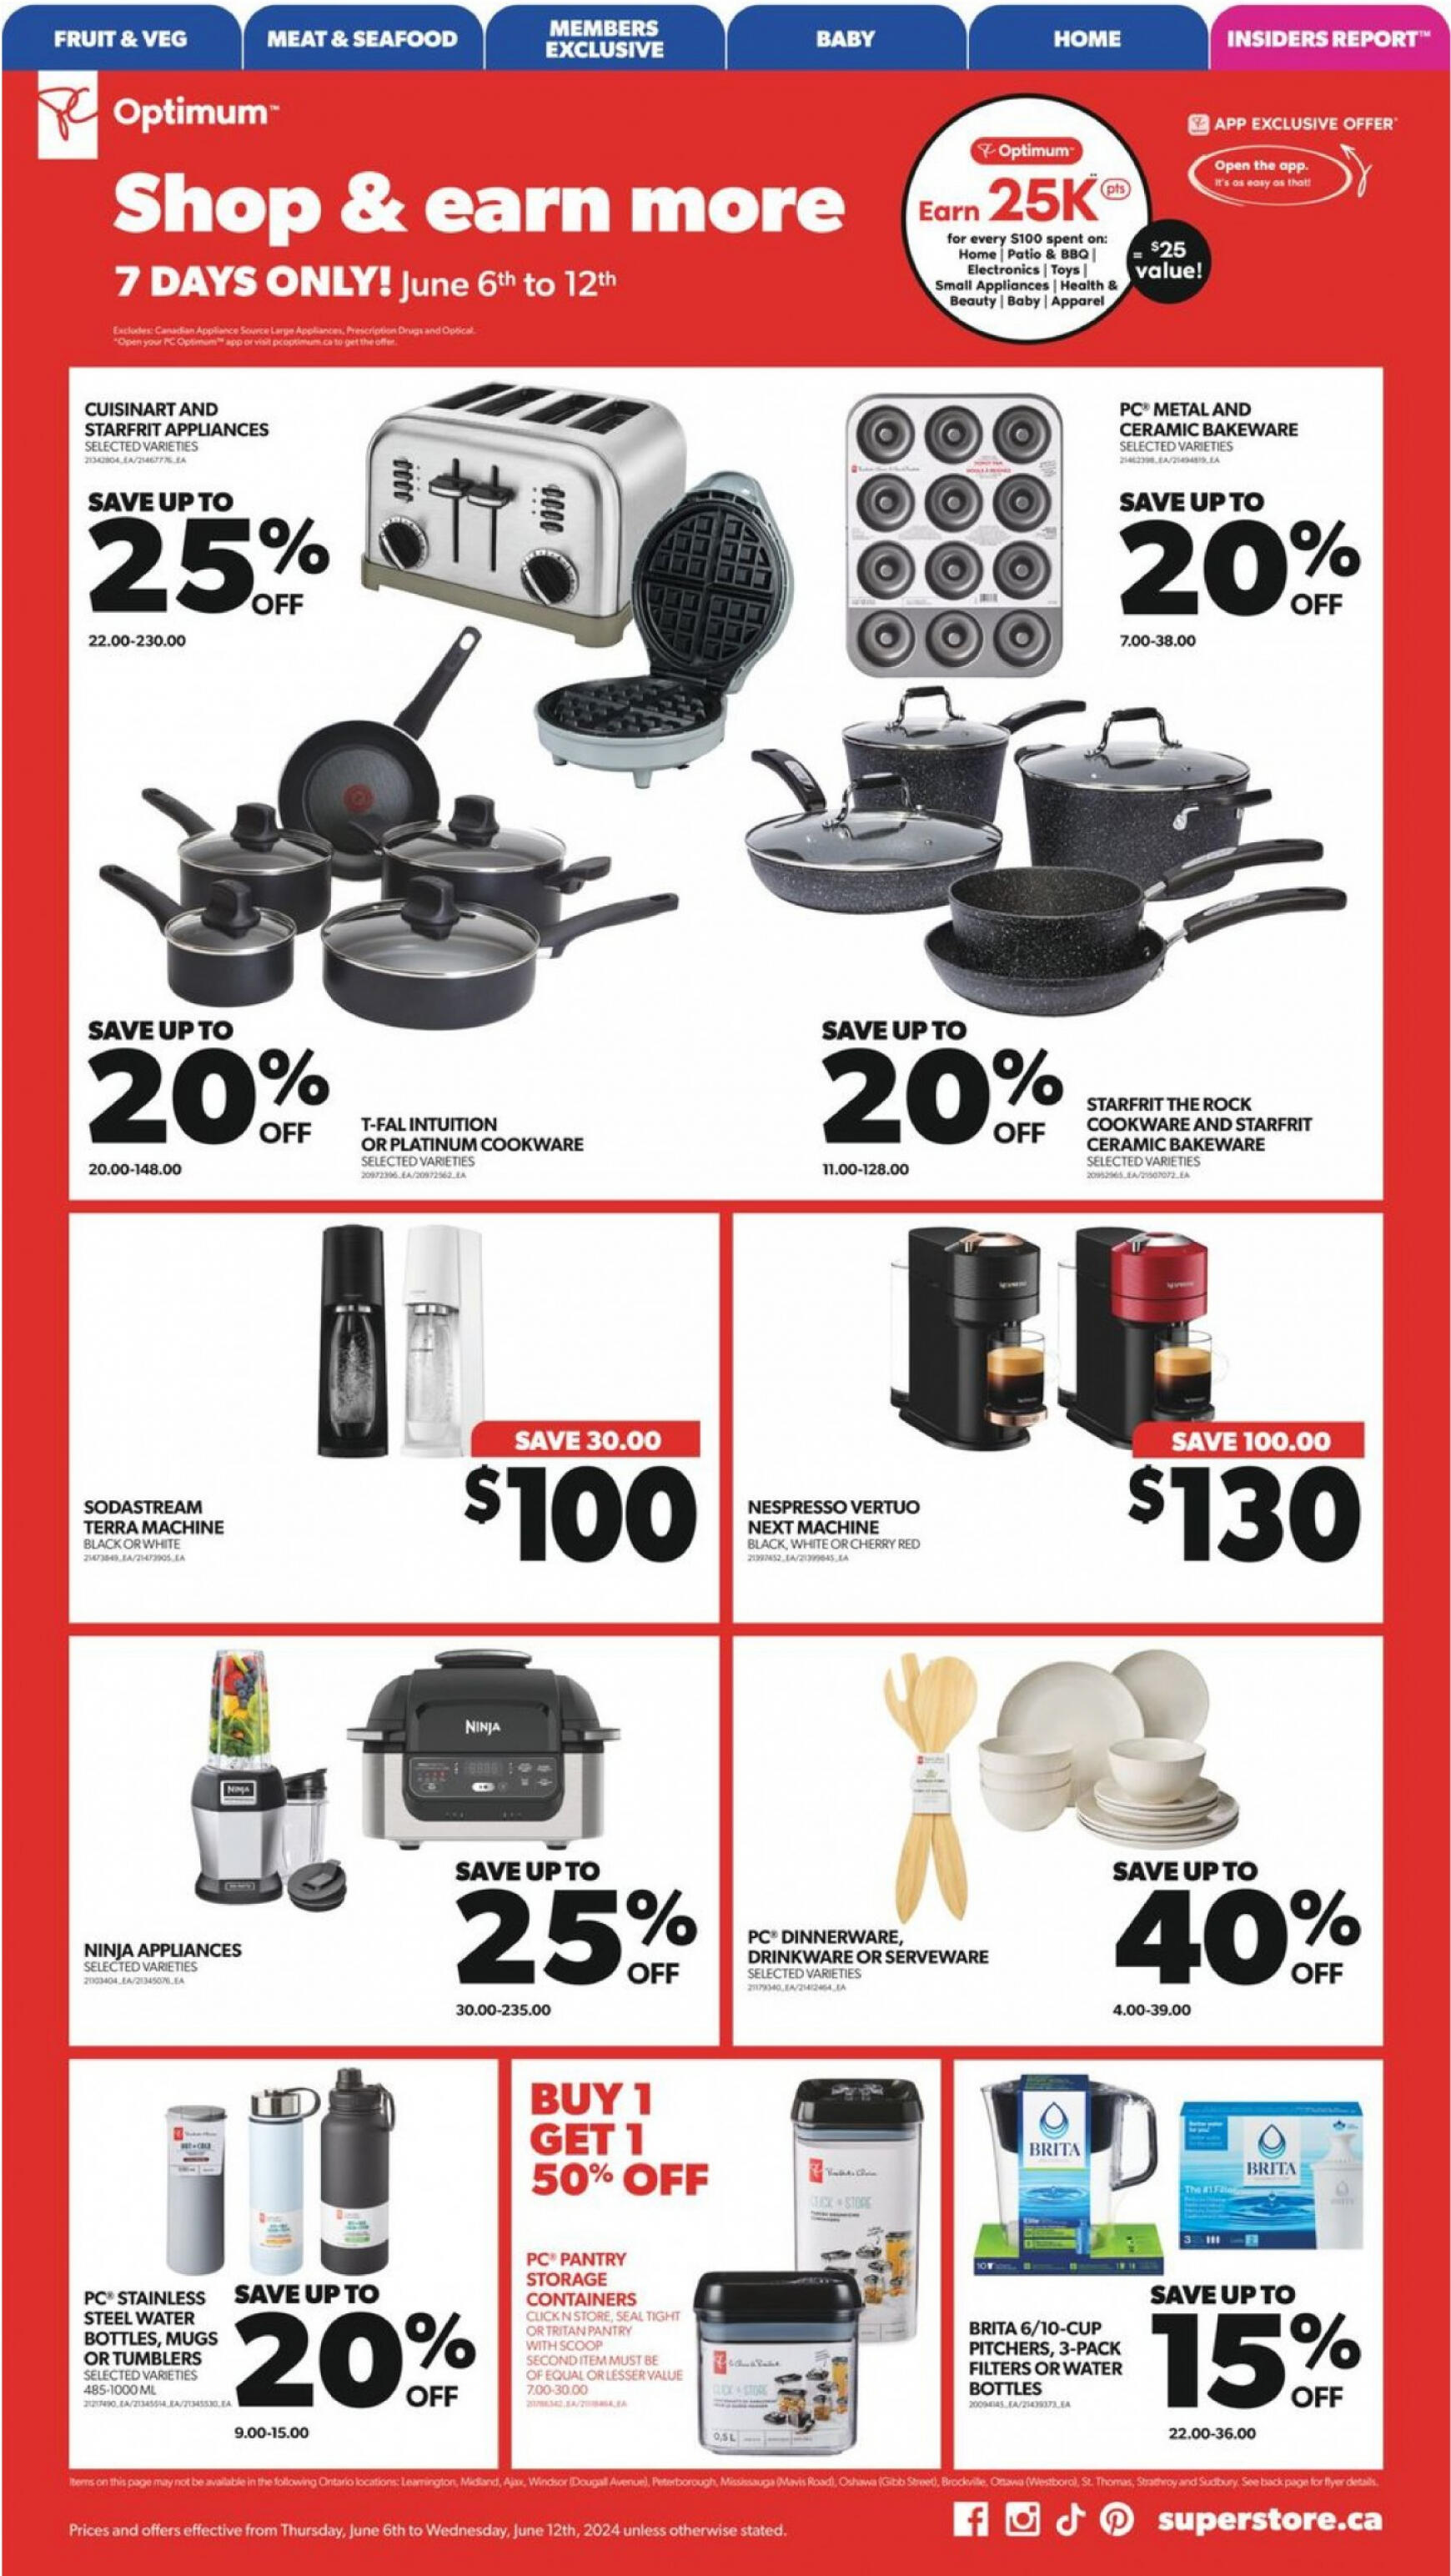 real-canadian-superstore - Real Canadian Superstore flyer current 06.06. - 12.06. - page: 25